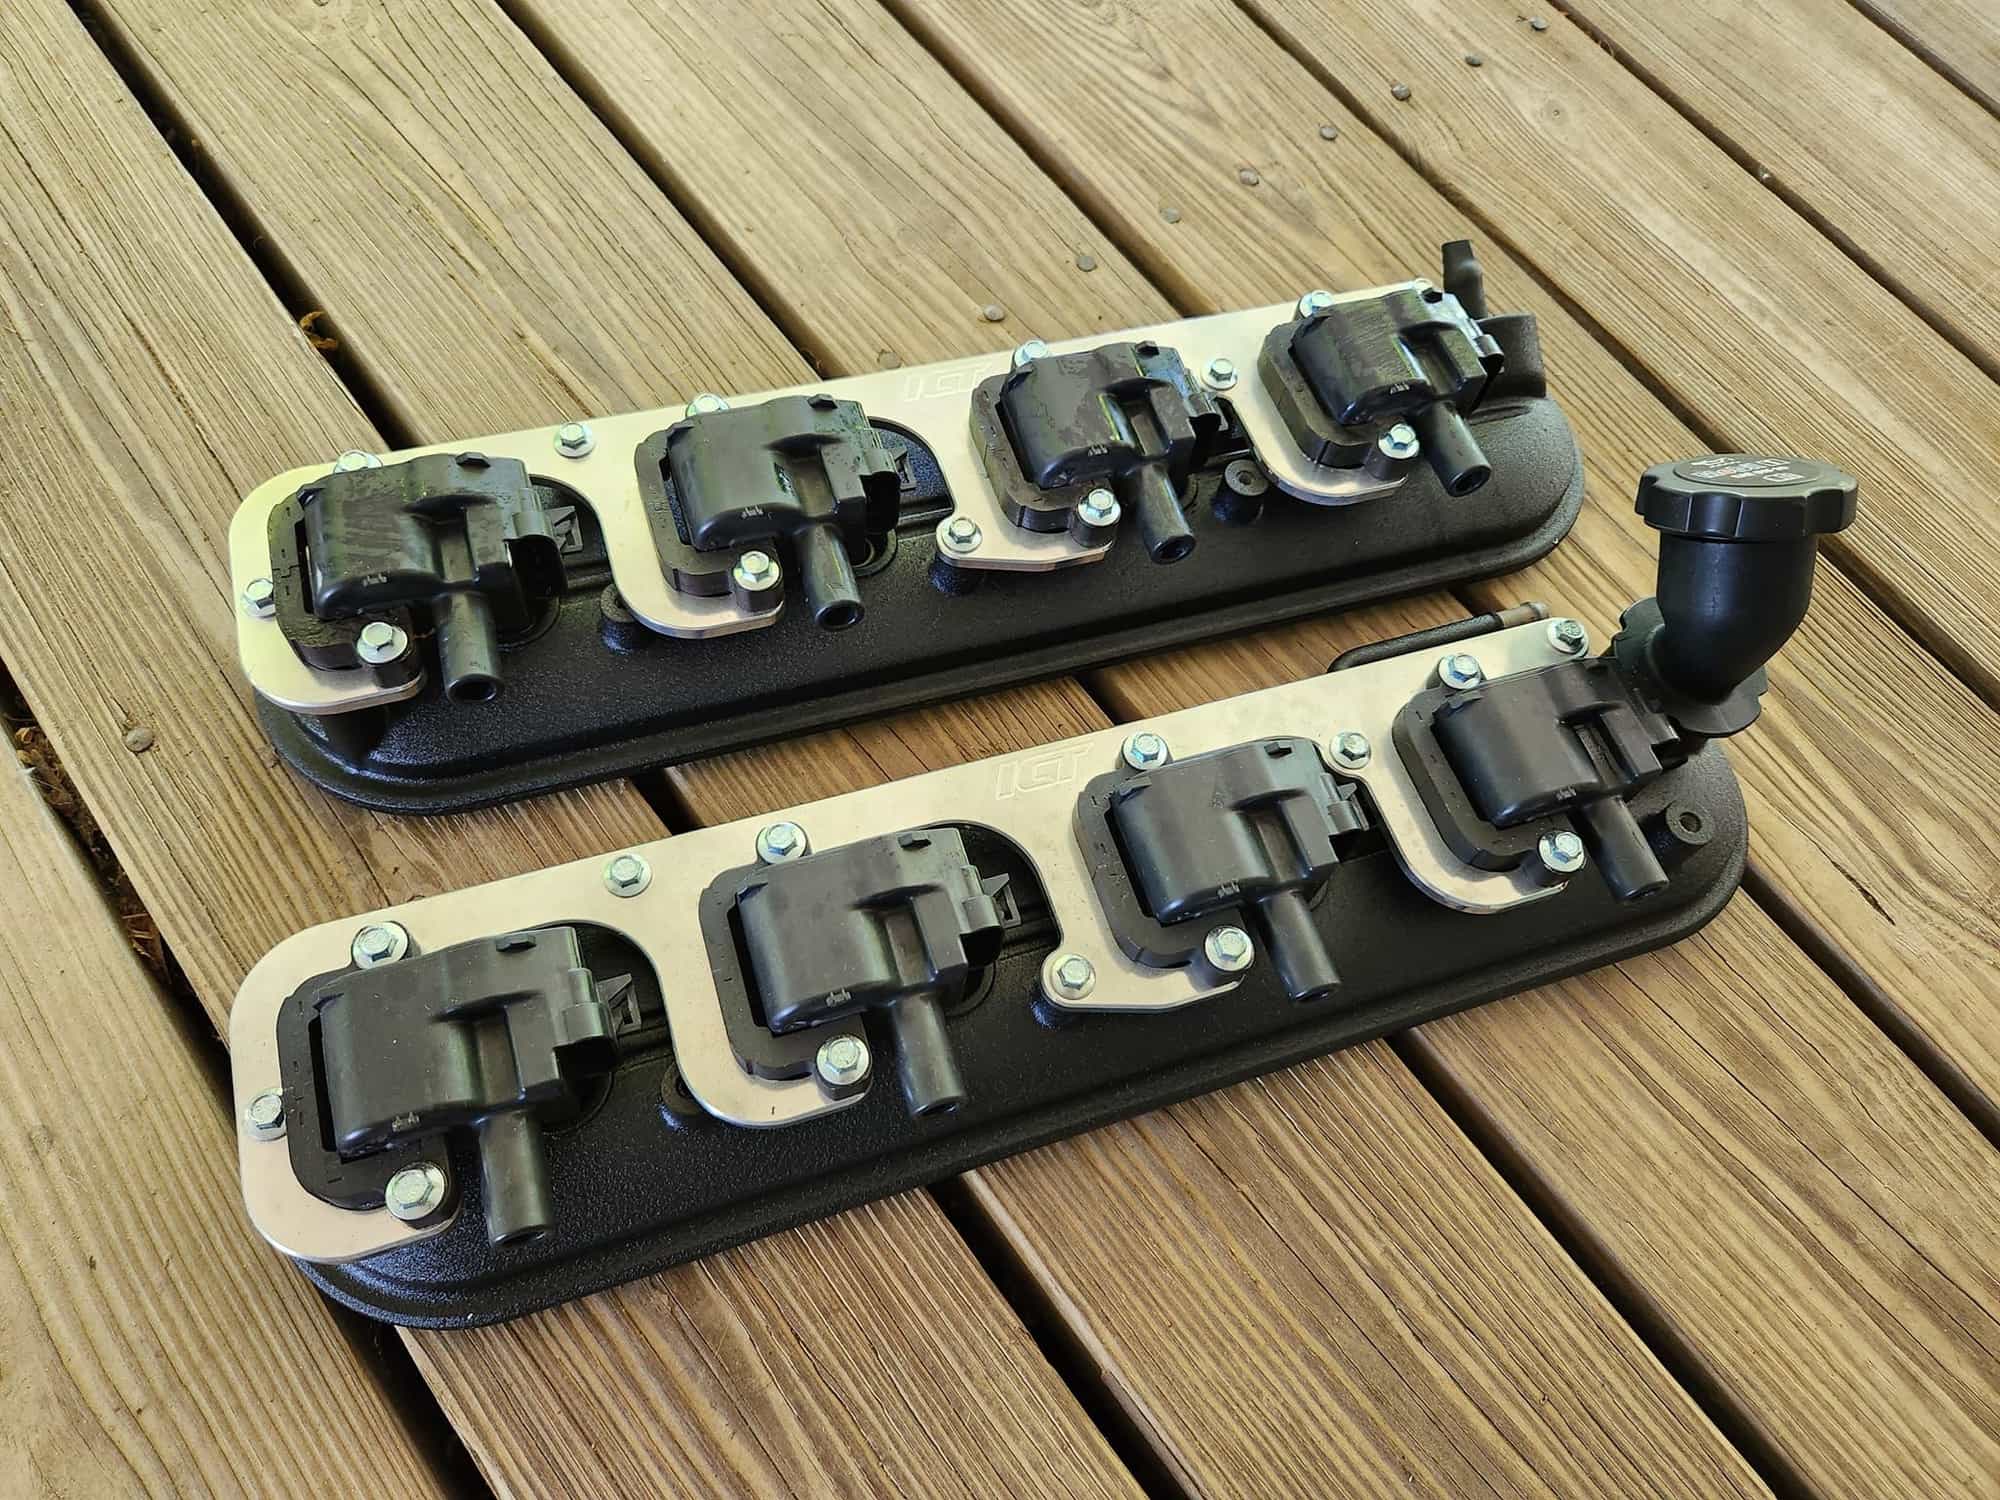 Miscellaneous - LSx Powdercoated Wrinkle Black Valve Covers - Used - 0  All Models - East Peoria, IL 61611, United States